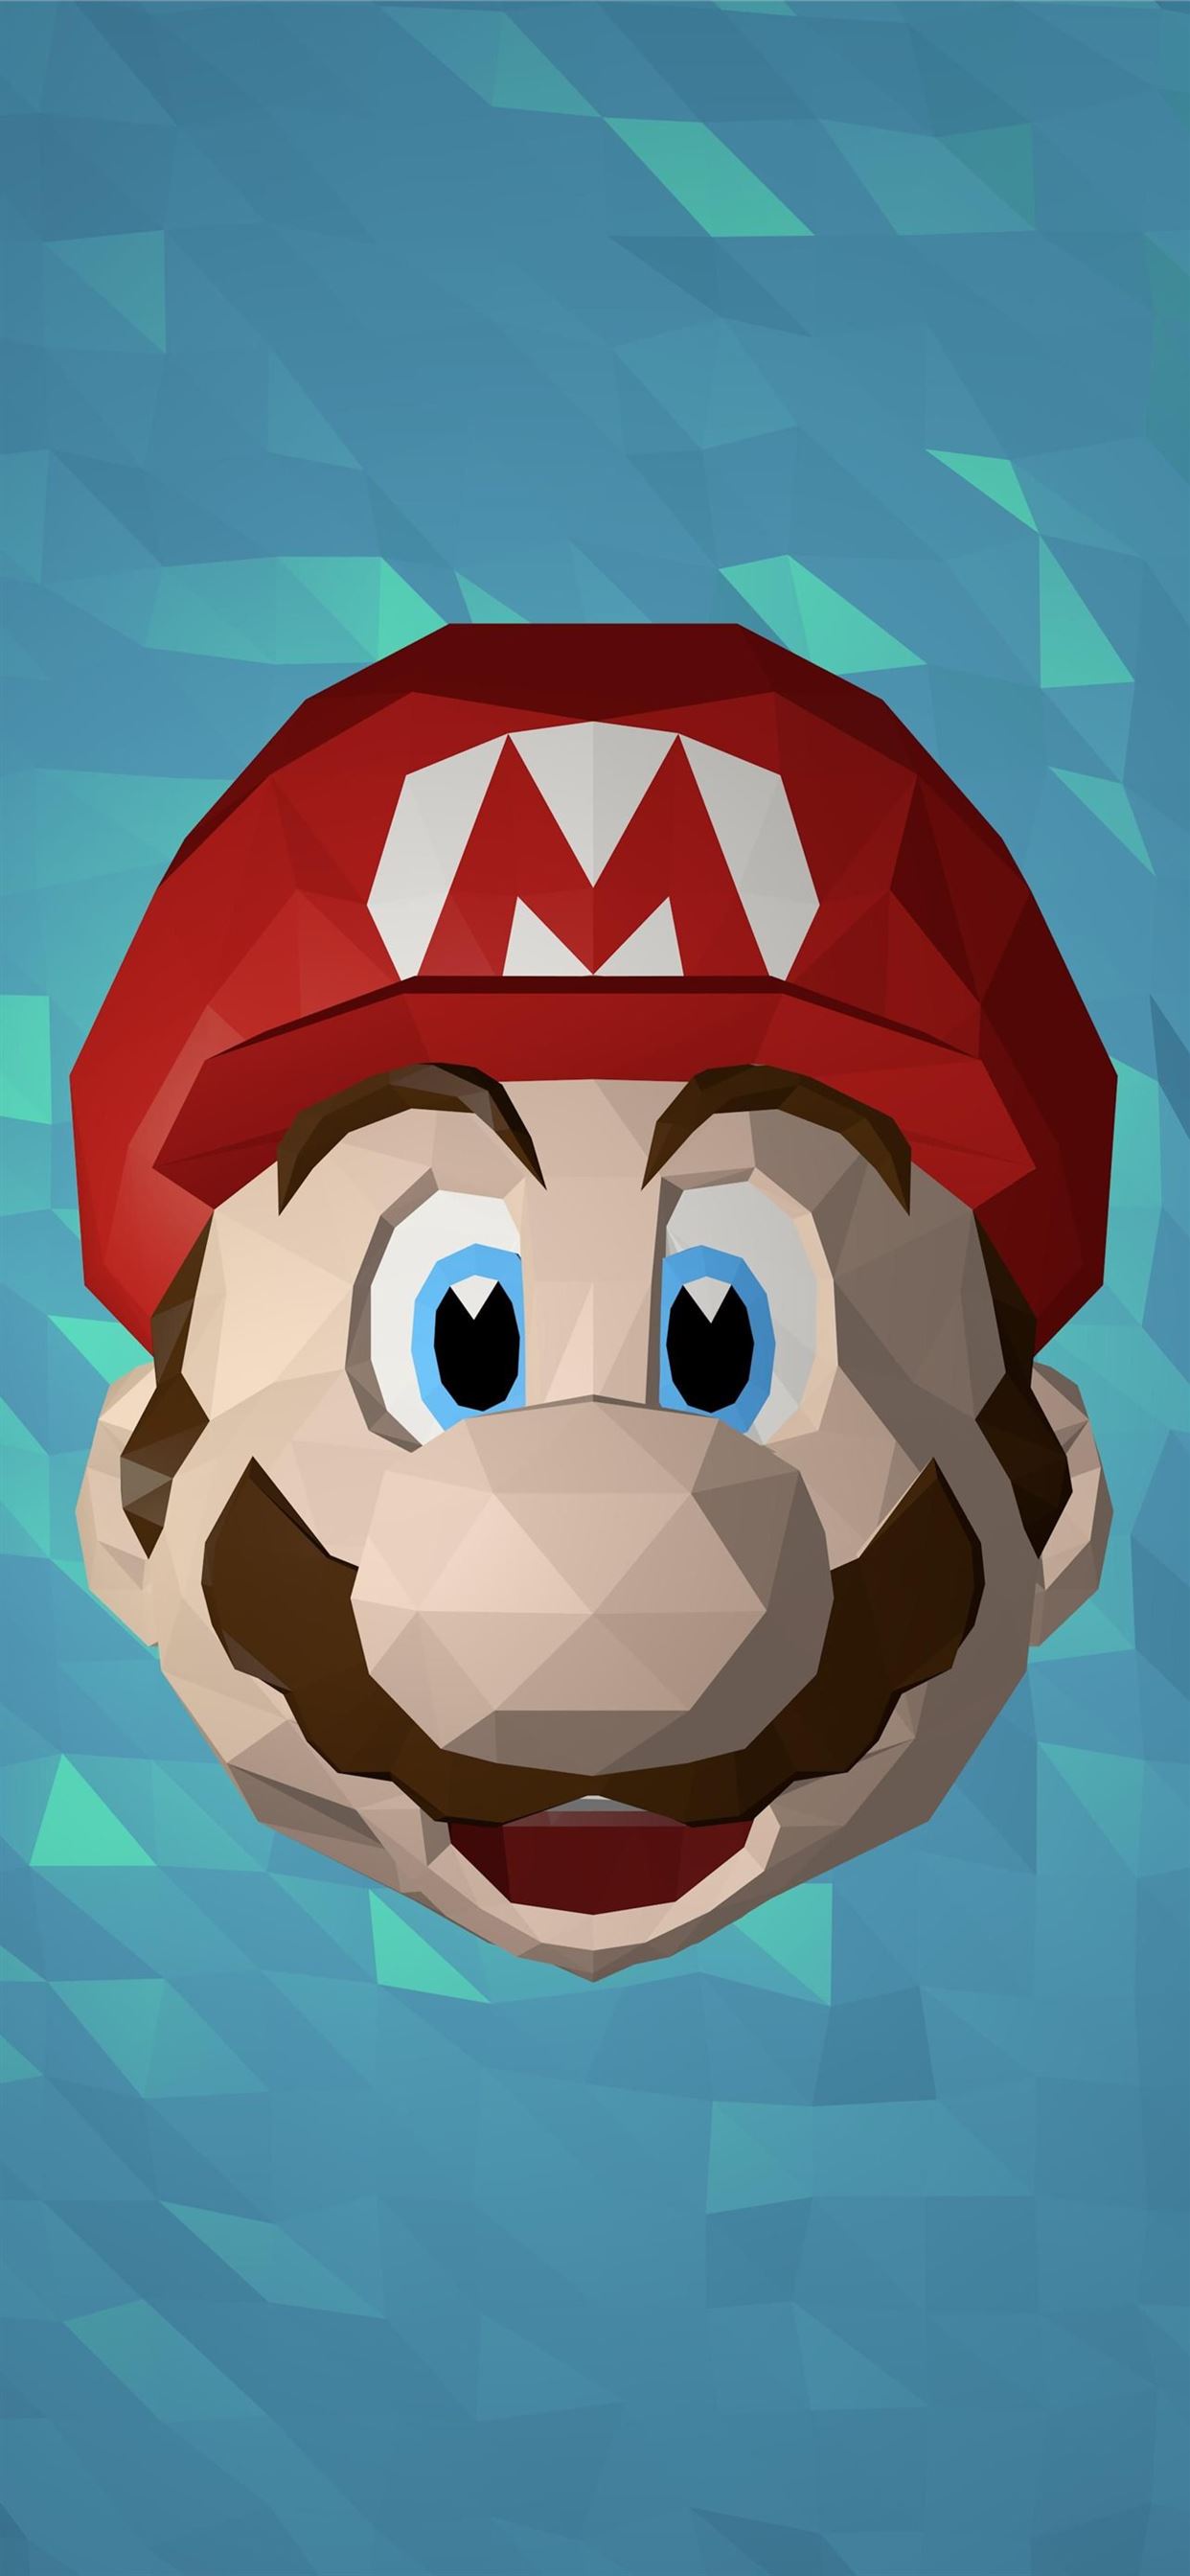 super mario 64 iPhone Wallpapers Free Download